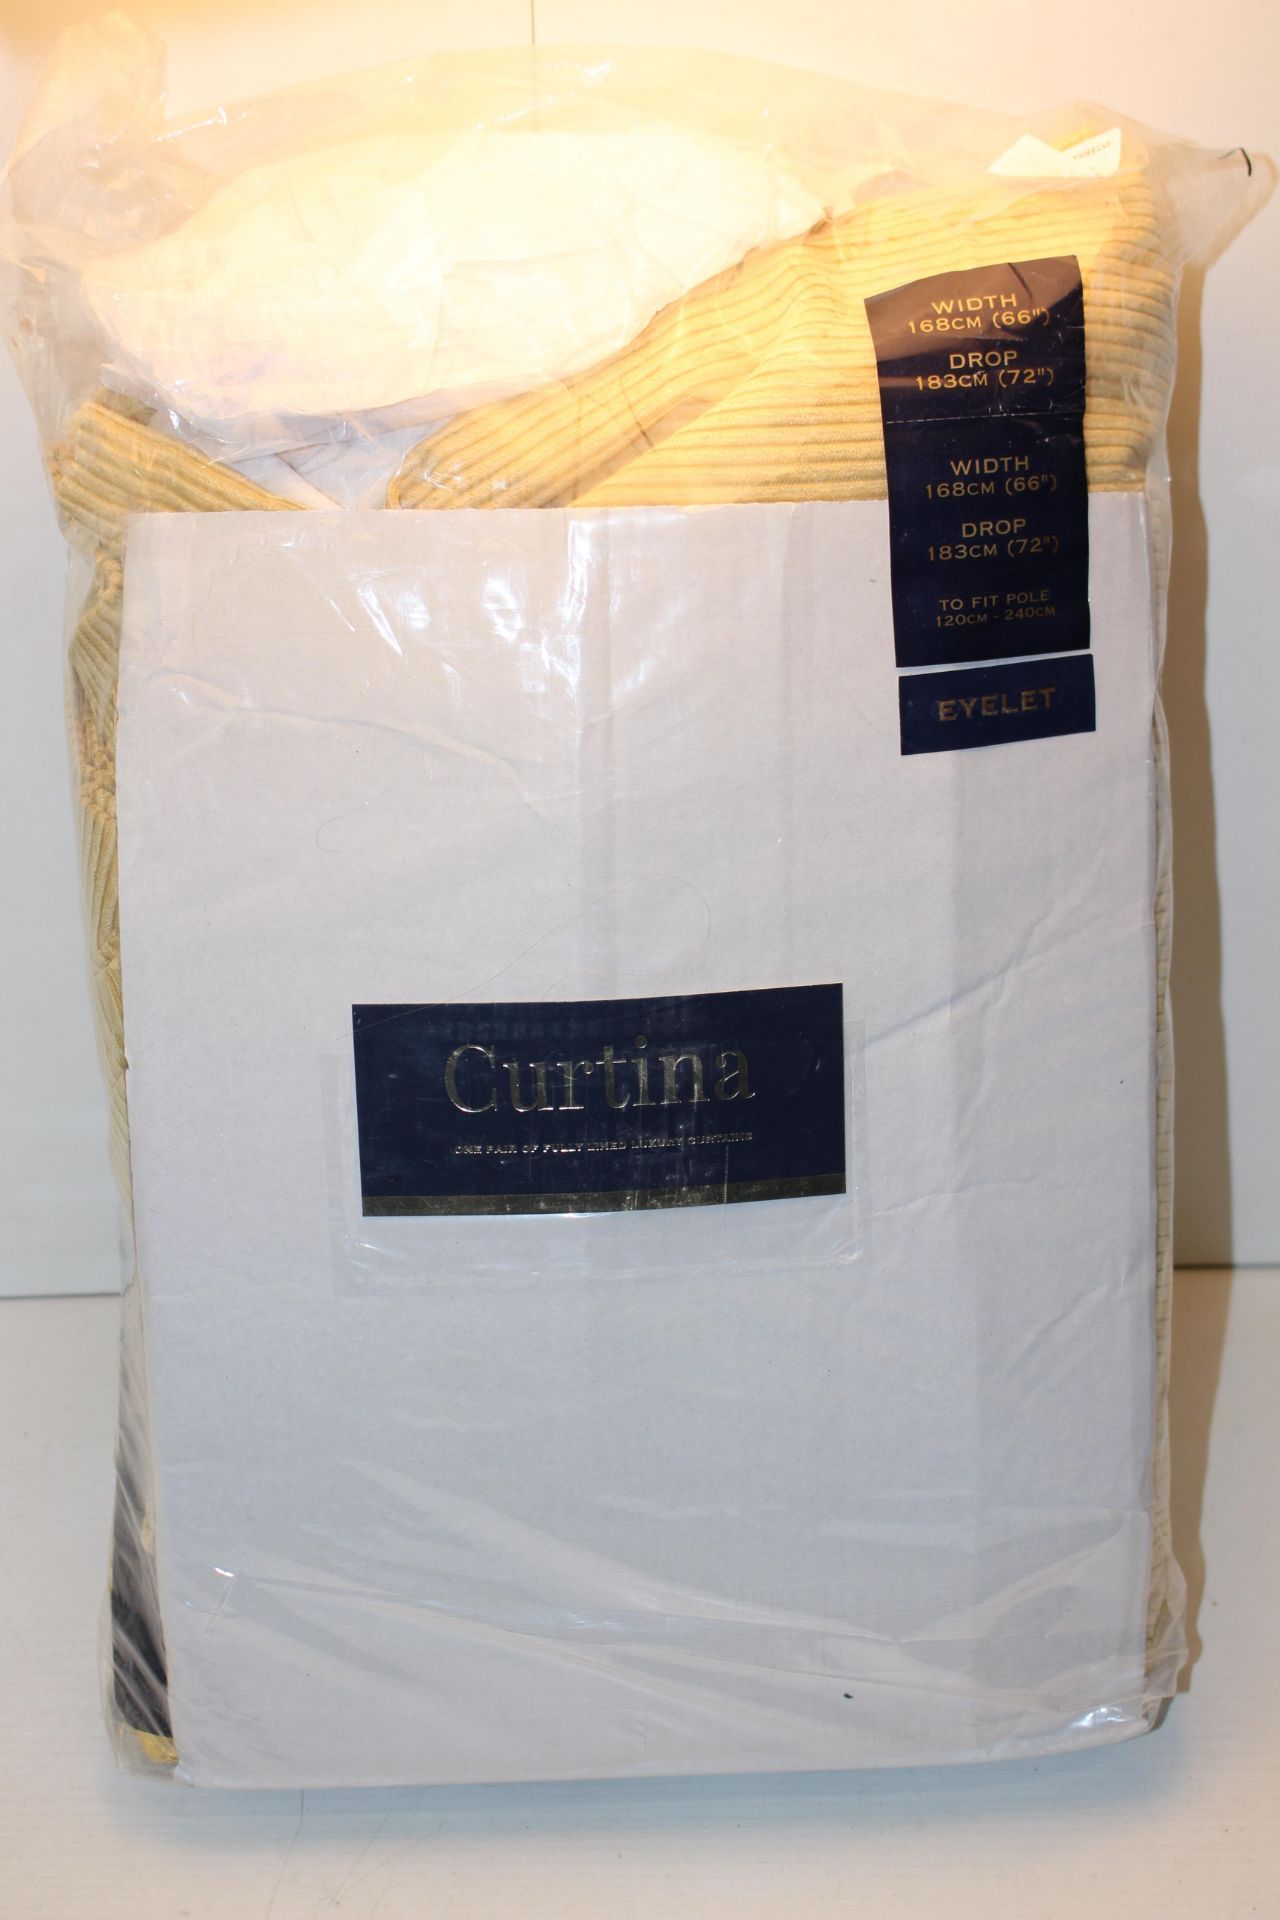 BAGGED CURTINA LUXURY CURTAINS EYELET 168 X 183 CM RRP £54.99 (AS SEEN IN WAYFAIR)Condition